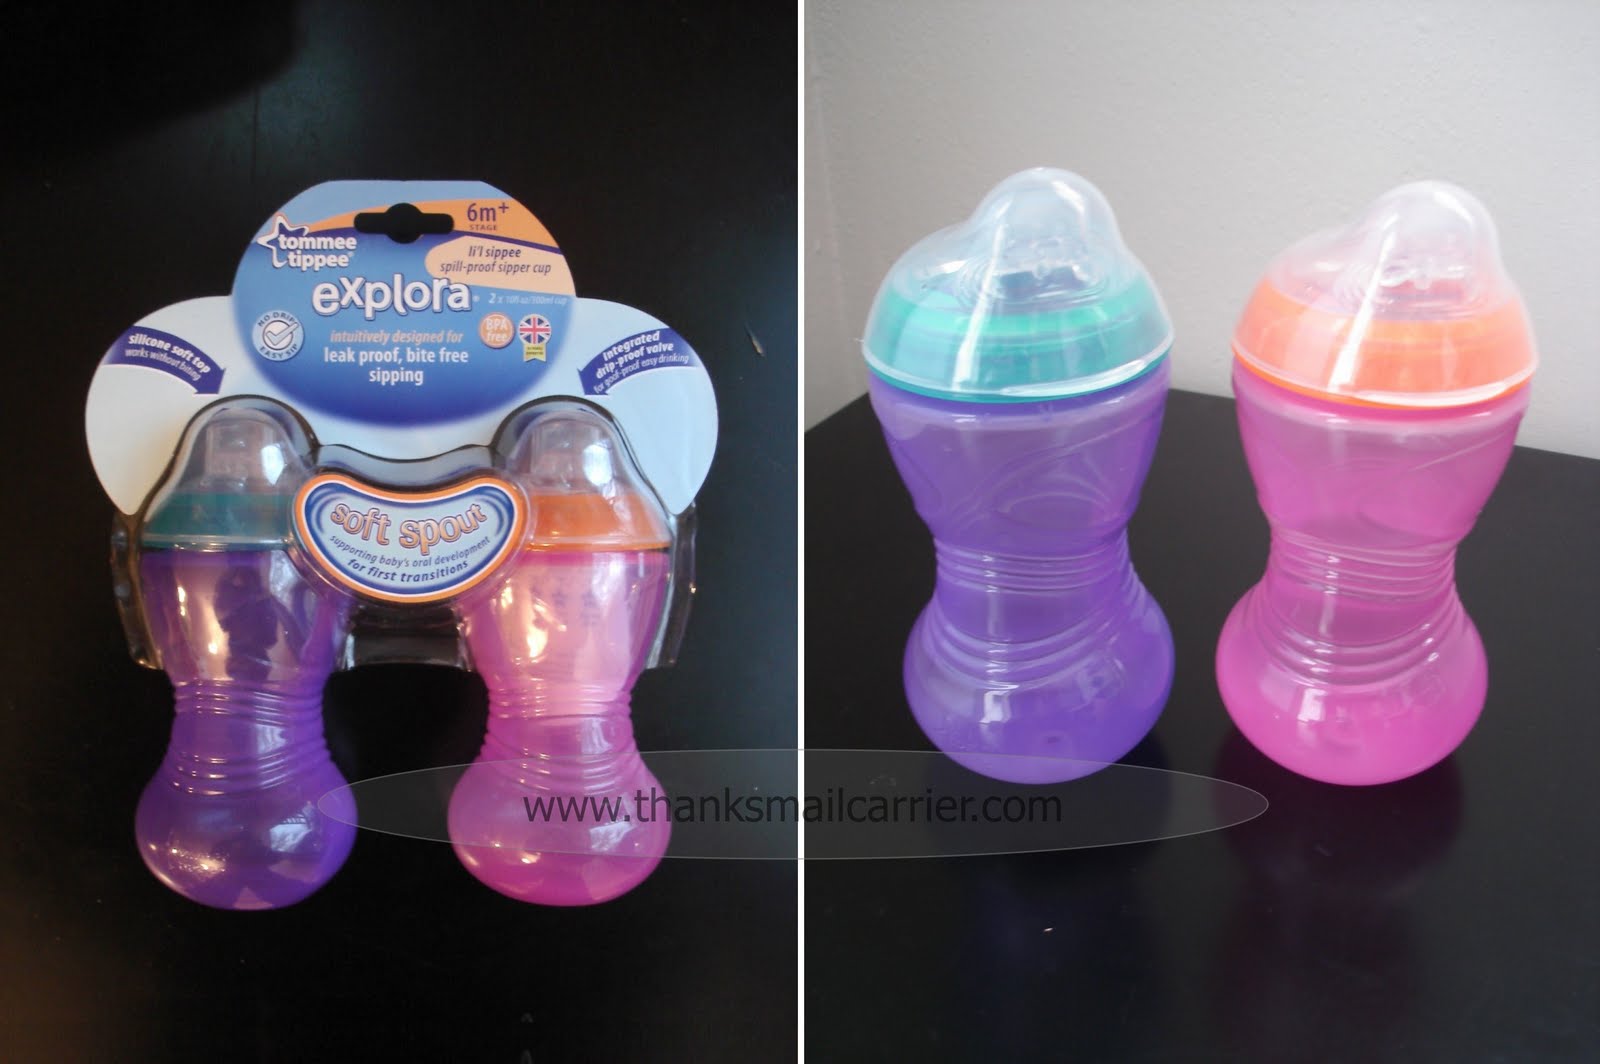 Tommee Tippee sippy cups the latest drink bottle to be found full of  'mould